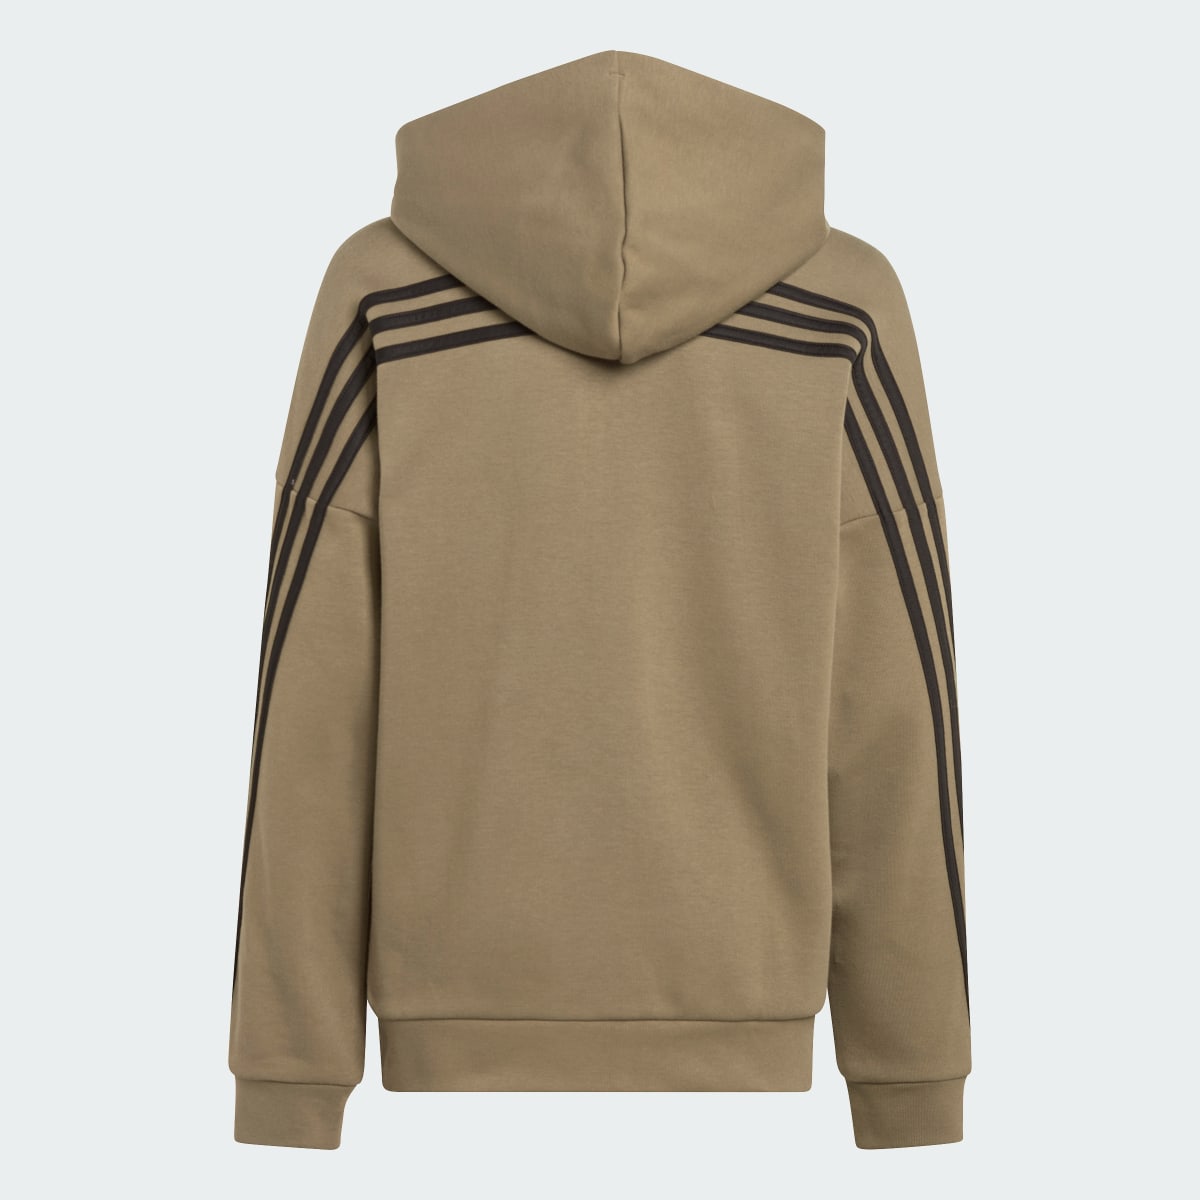 Adidas Future Icons 3-Stripes Full-Zip Hooded Track Top. 4